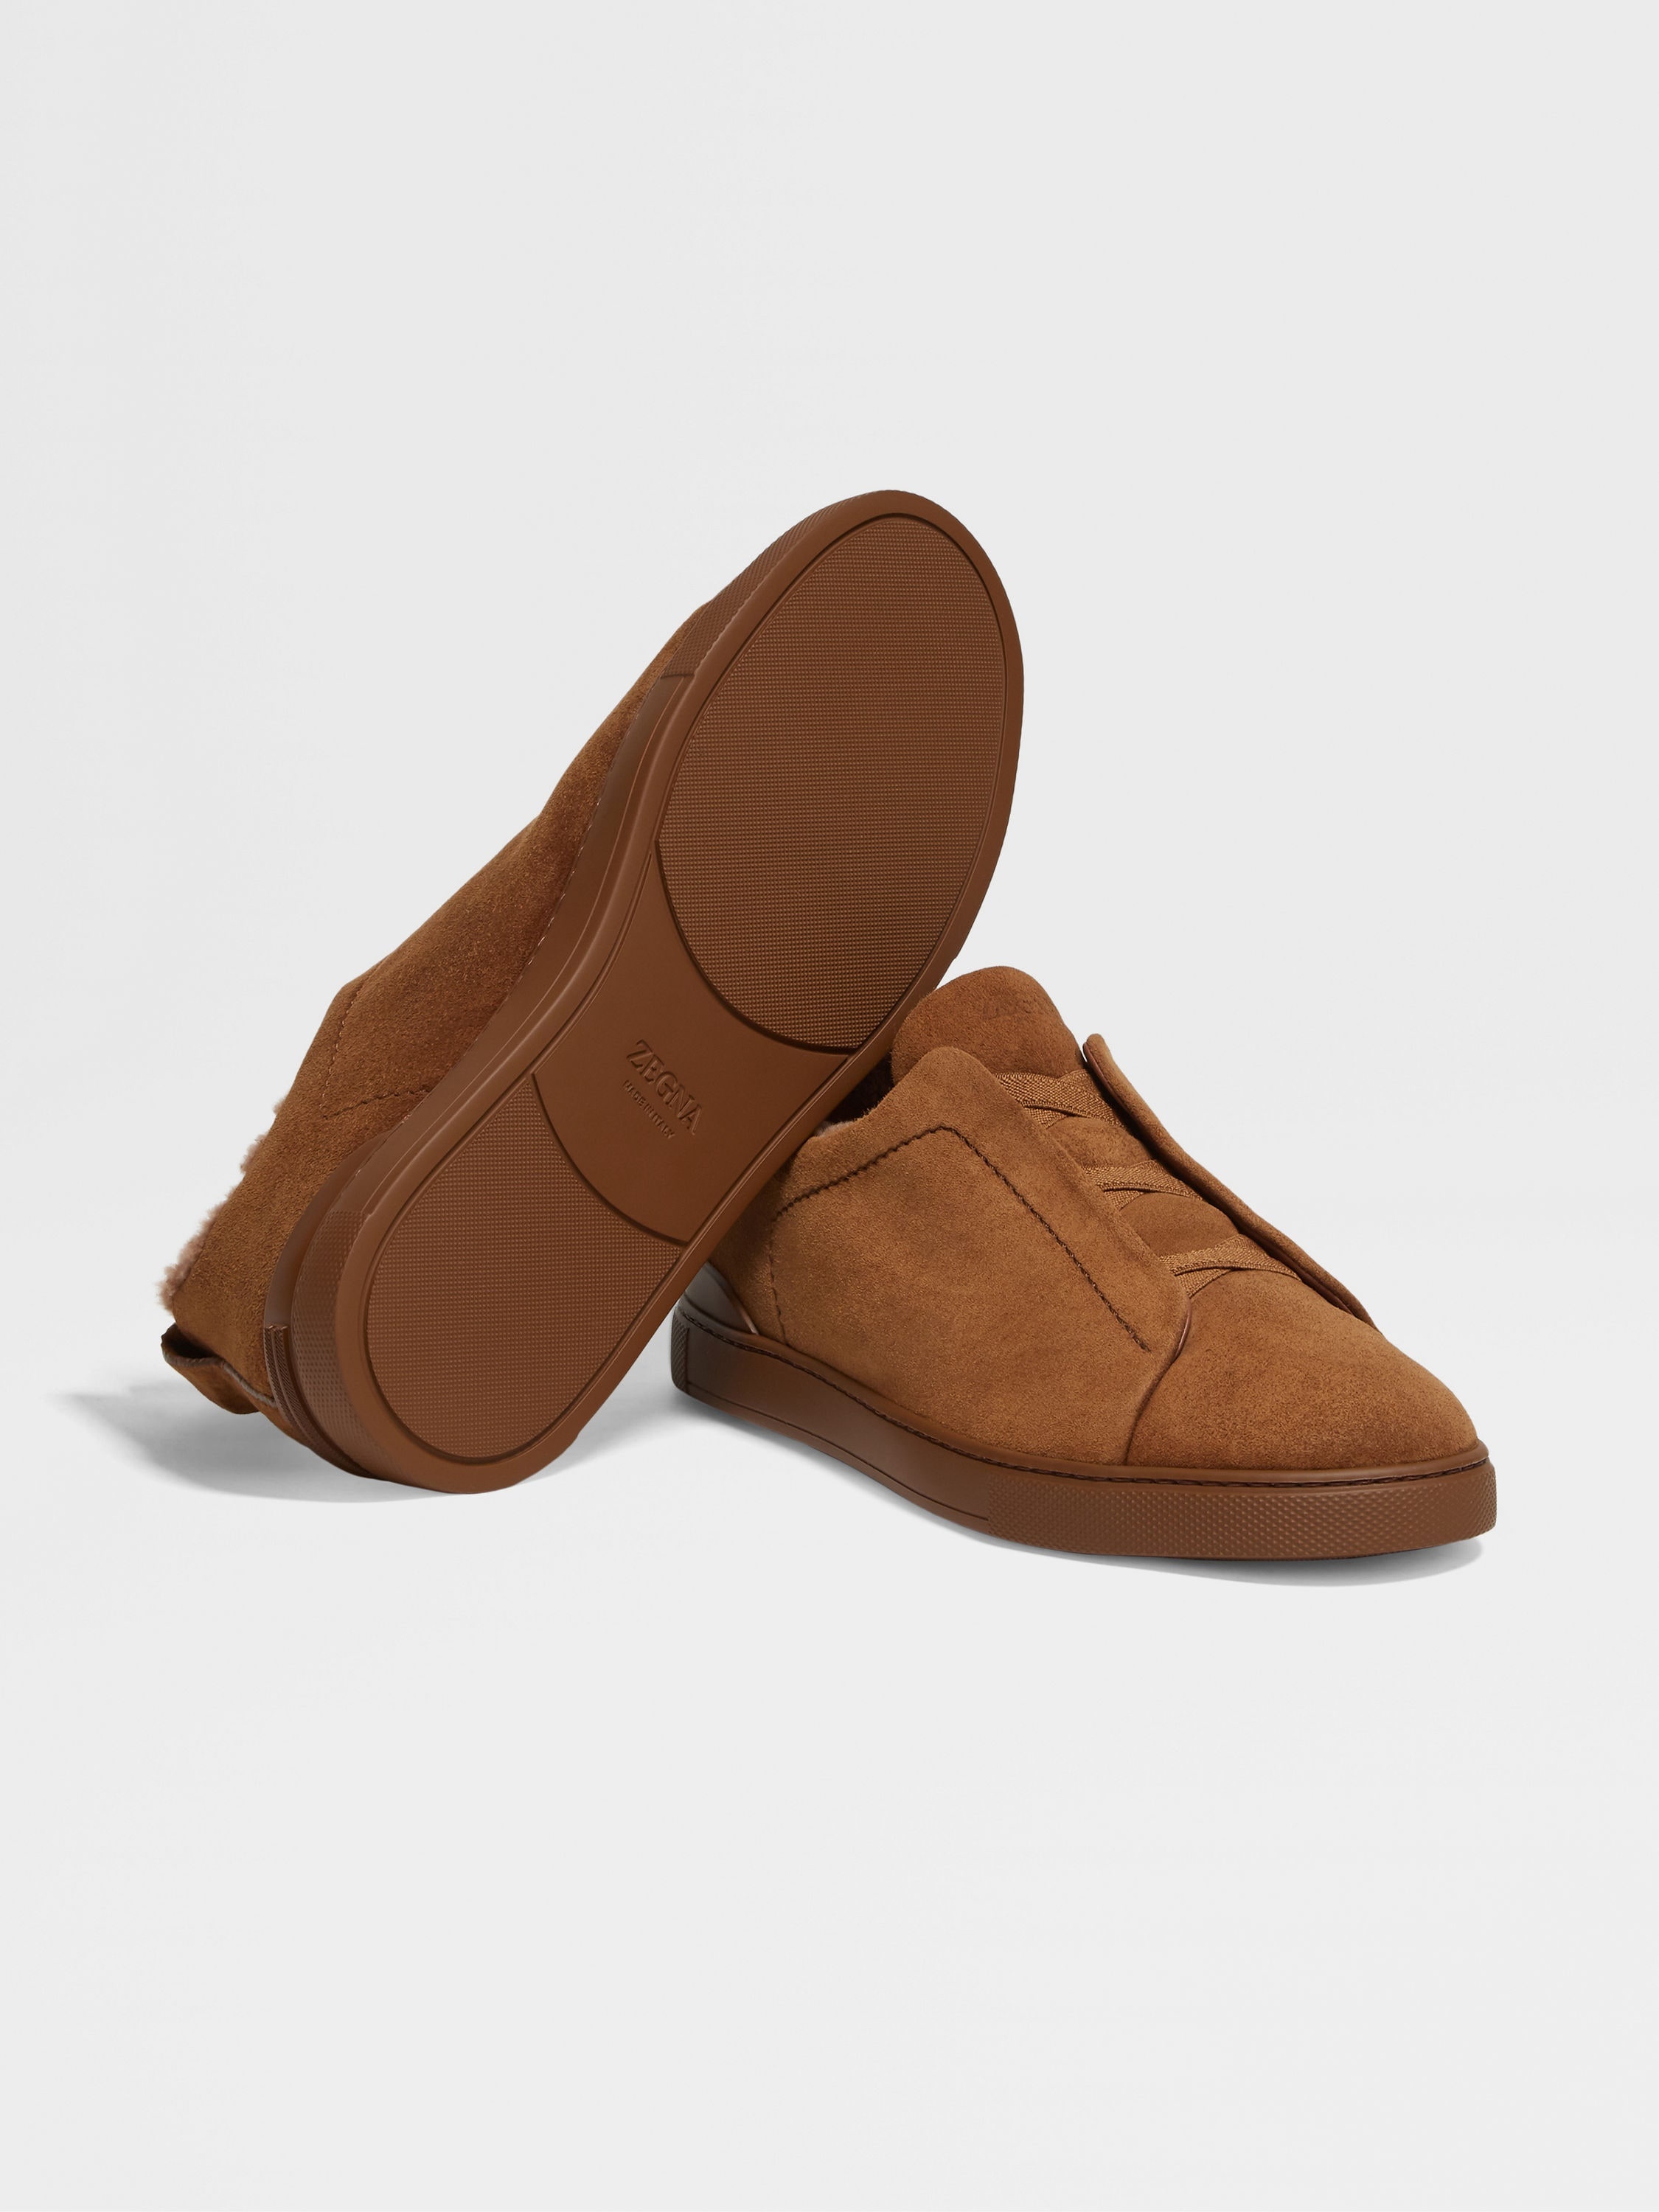 LIGHT BROWN SUEDE TRIPLE STITCH™ SNEAKERS - 5